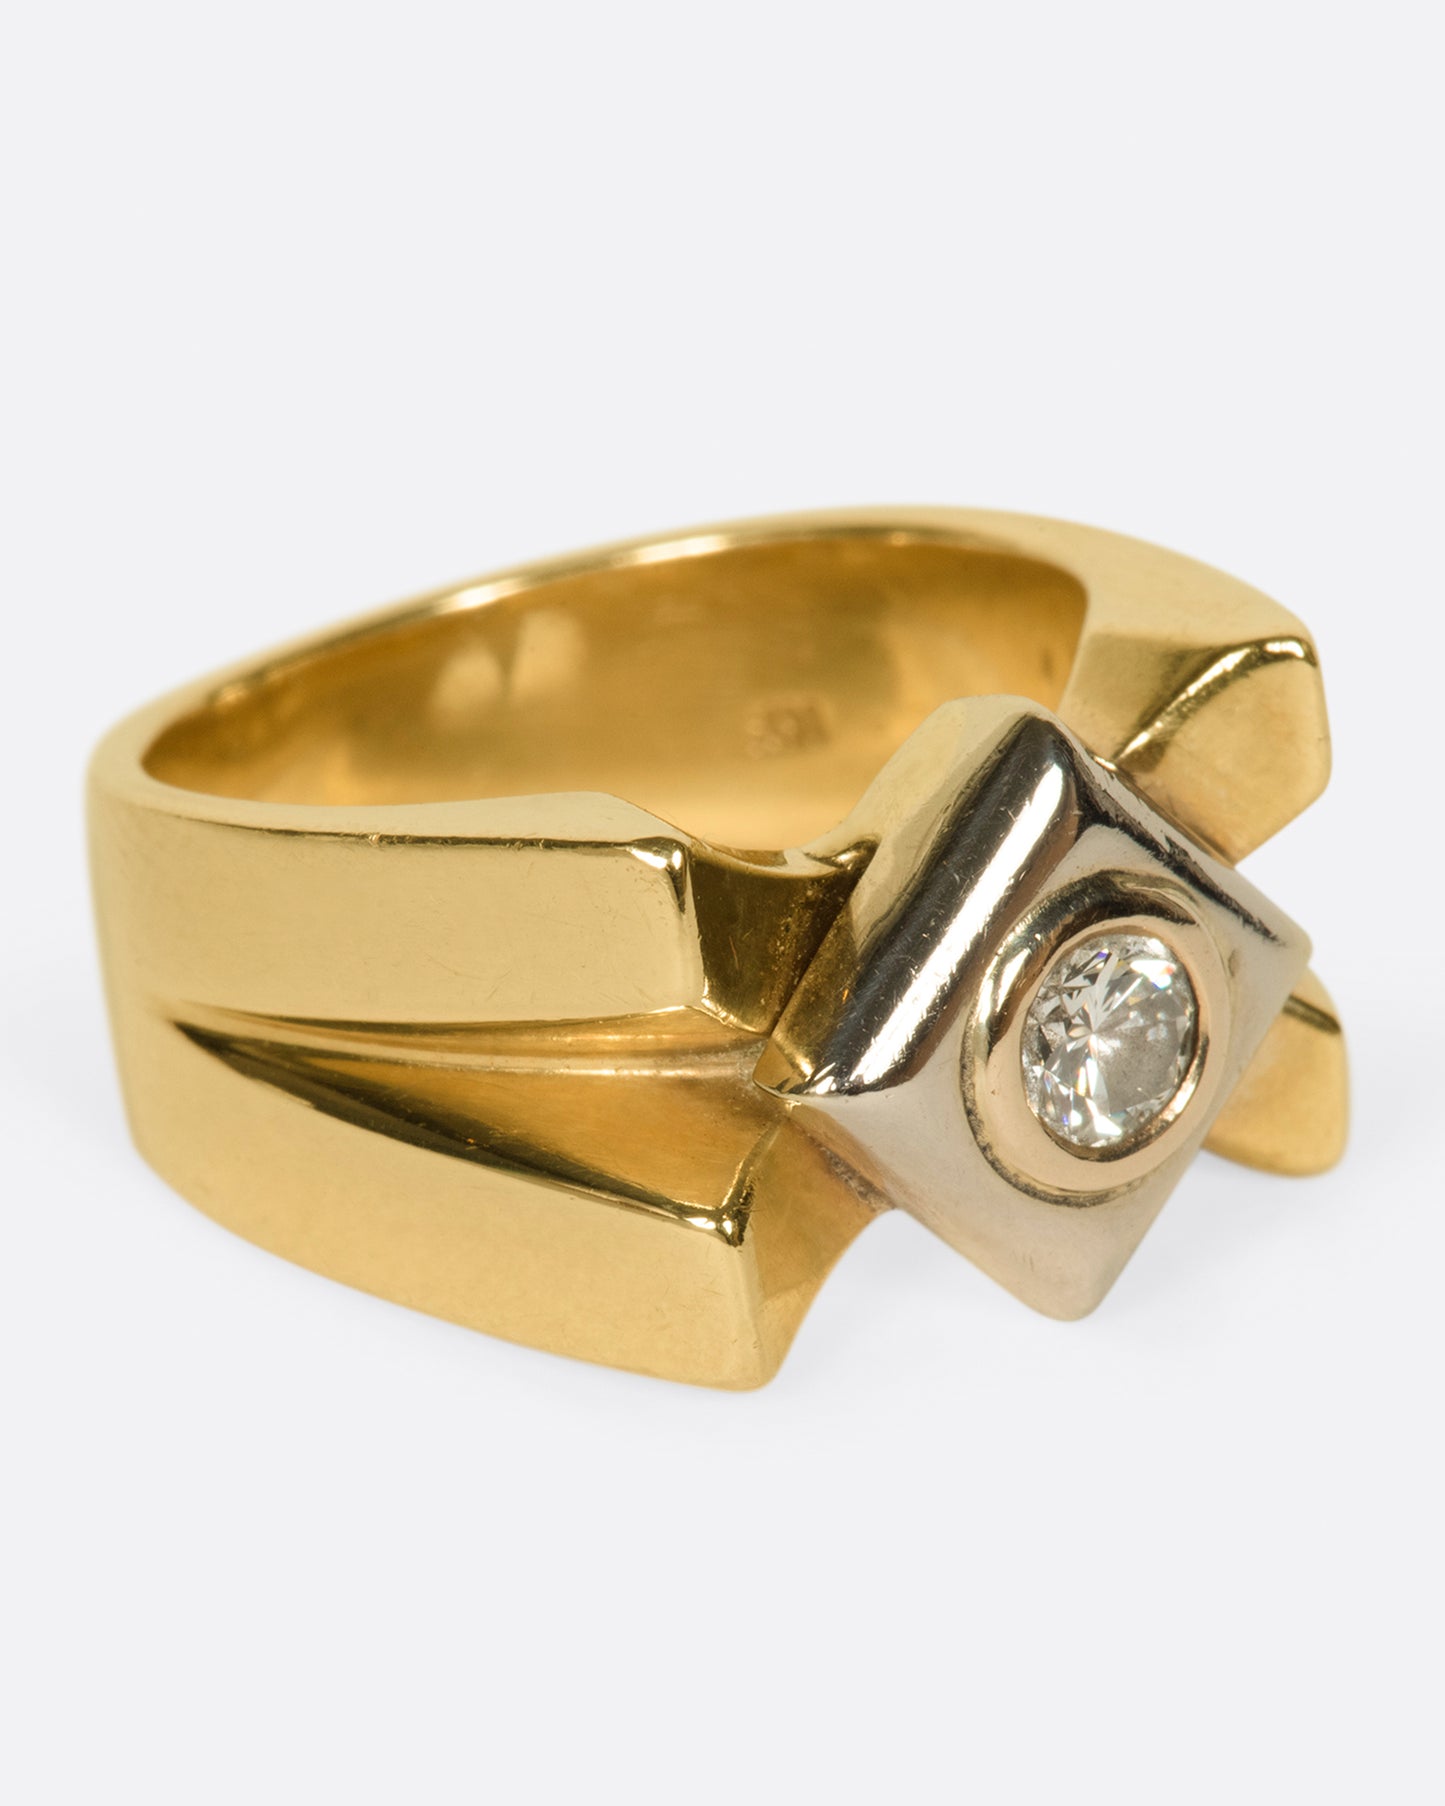 A heavy, gold, X-shaped ring with a white gold square and a round diamond at its center.